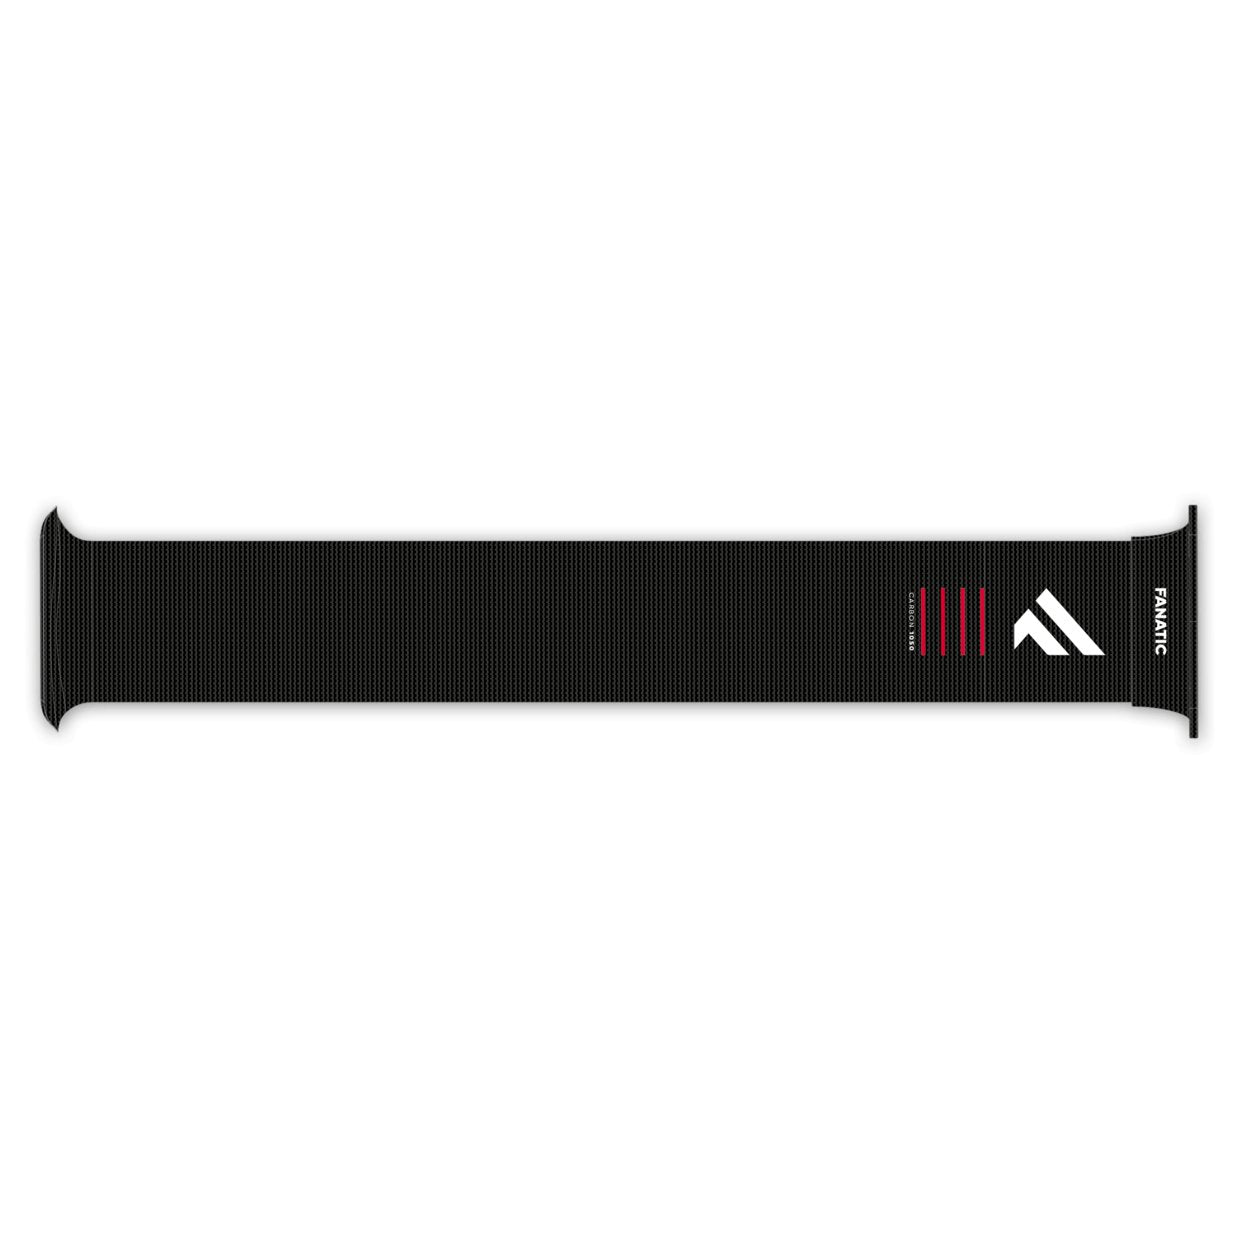 Fanatic Mast Carbon (CN) 2022 - Worthing Watersports - 9010583061535 - Foilparts - Fanatic X